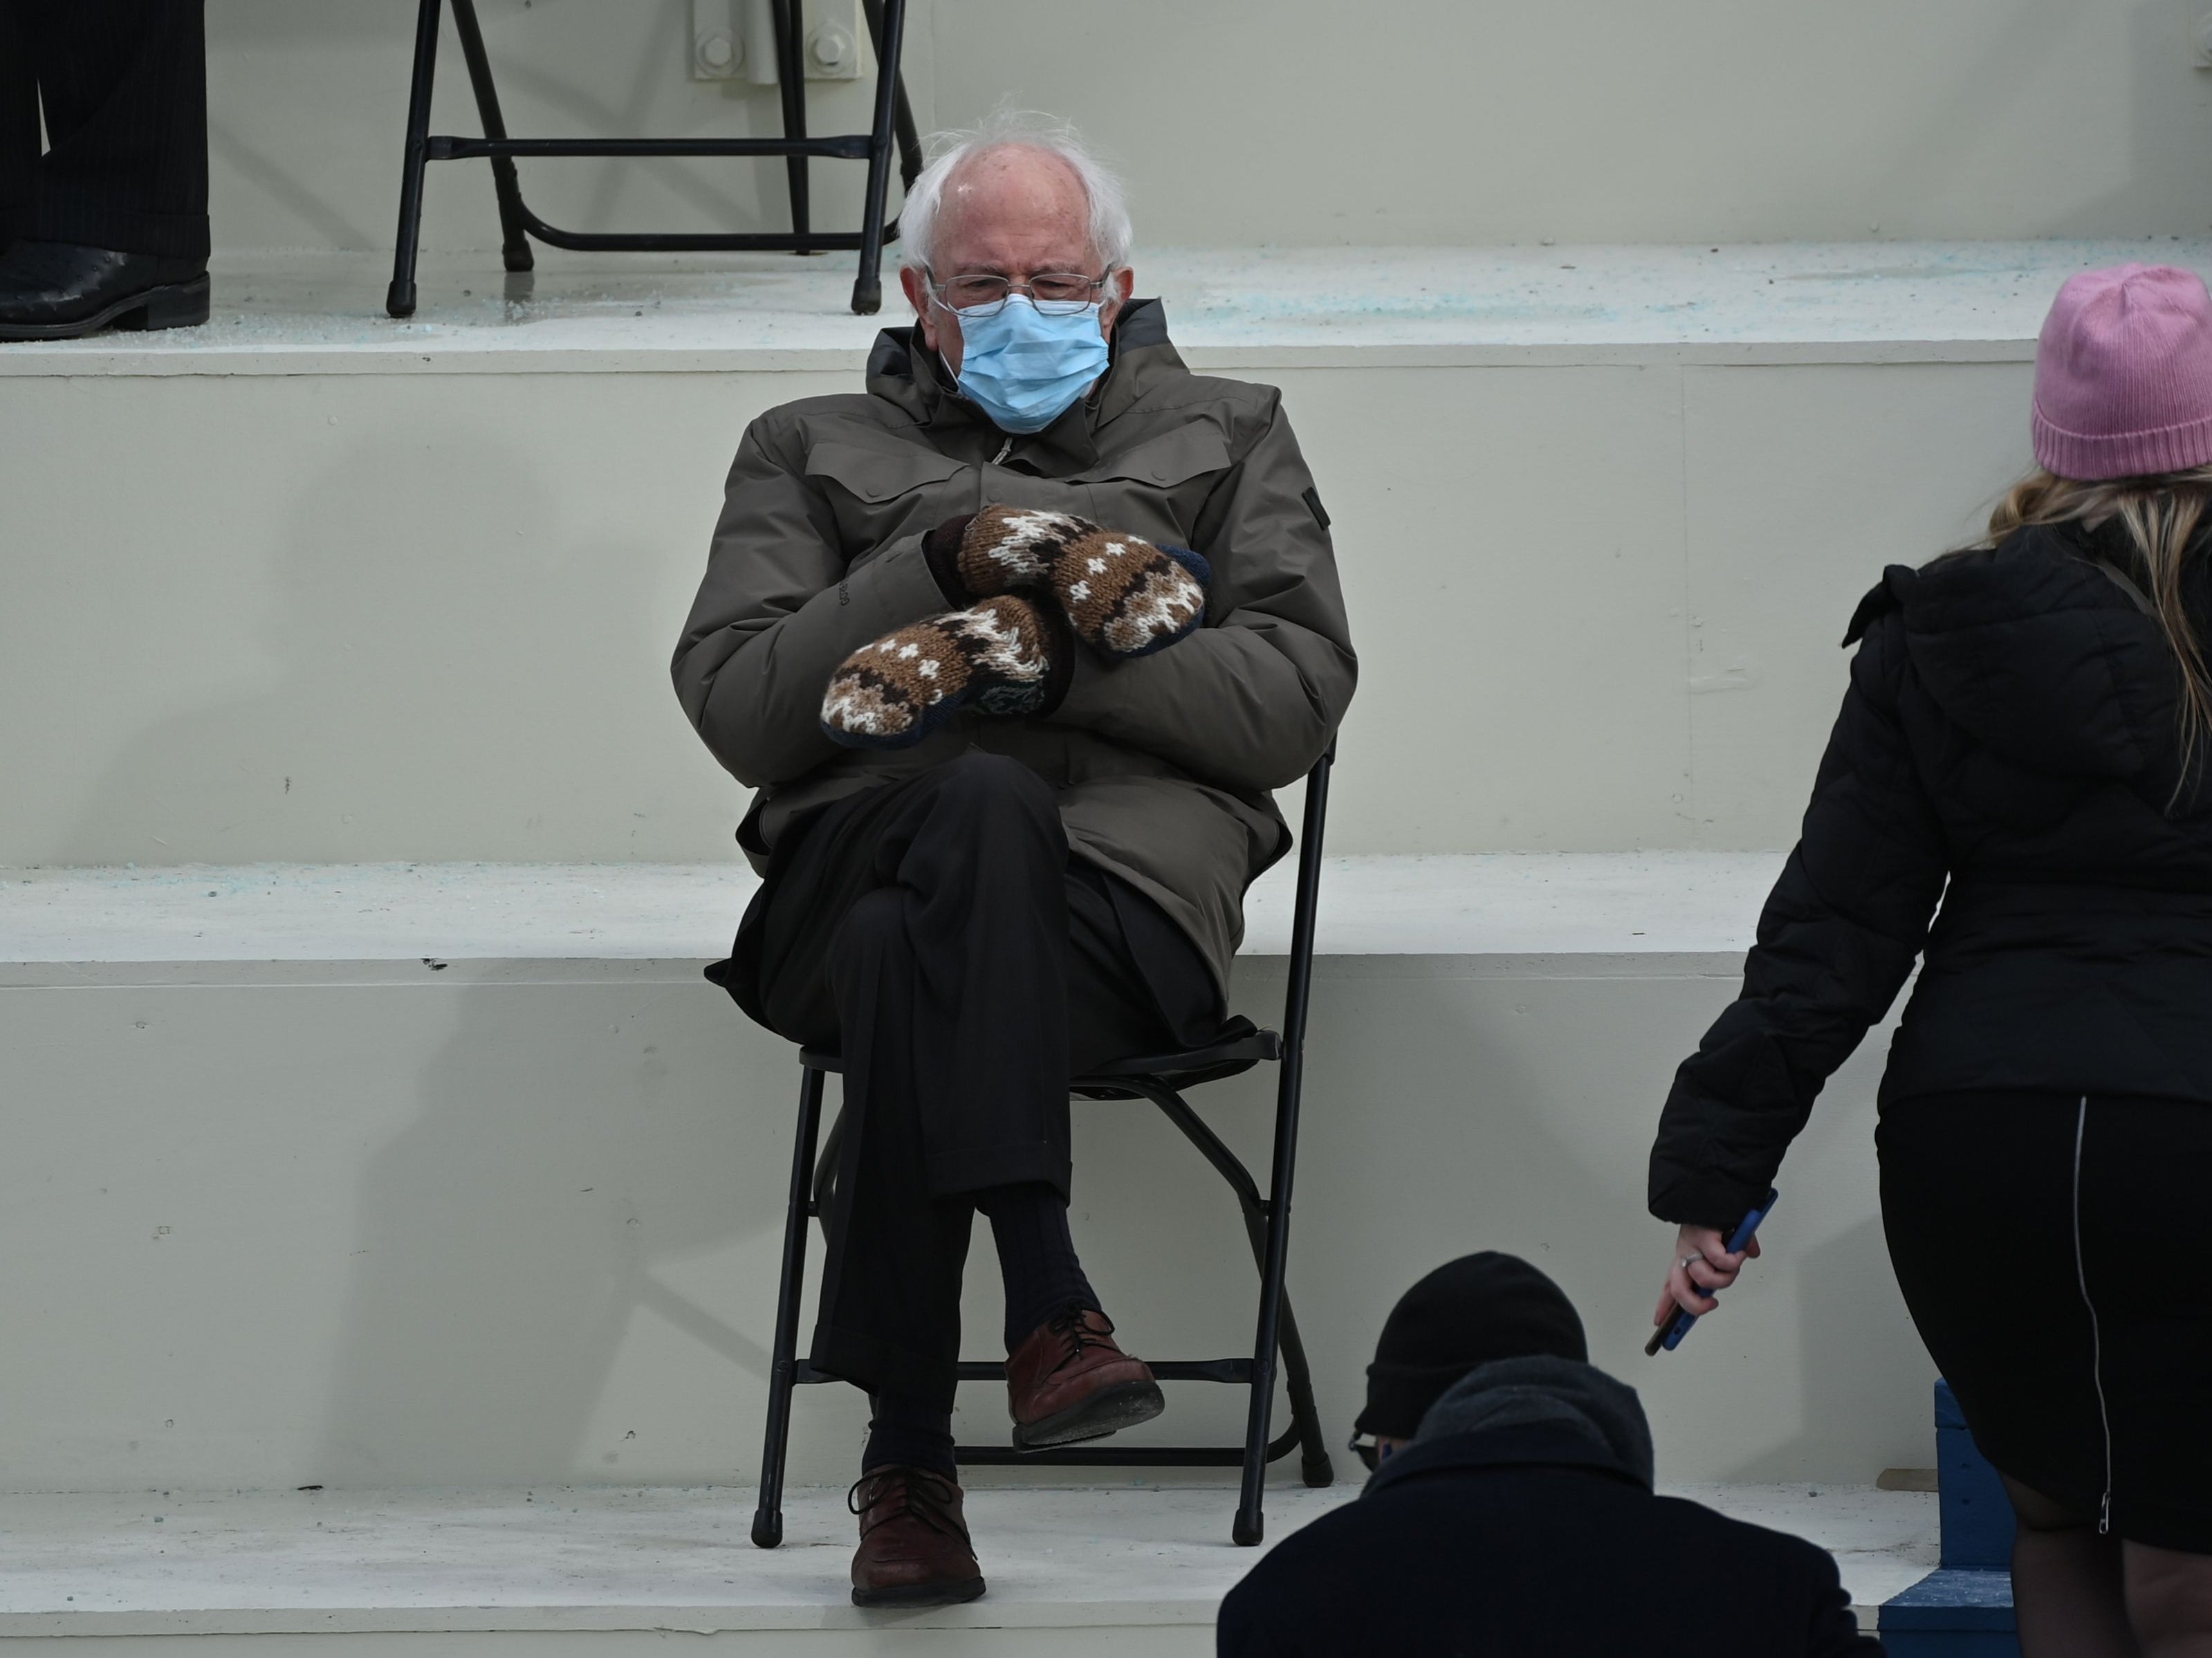 Bernie Sanders sits in the bleachers on Capitol Hill before Joe Biden is sworn in as the 46th US president on 20 January 2021, at the US Capitol